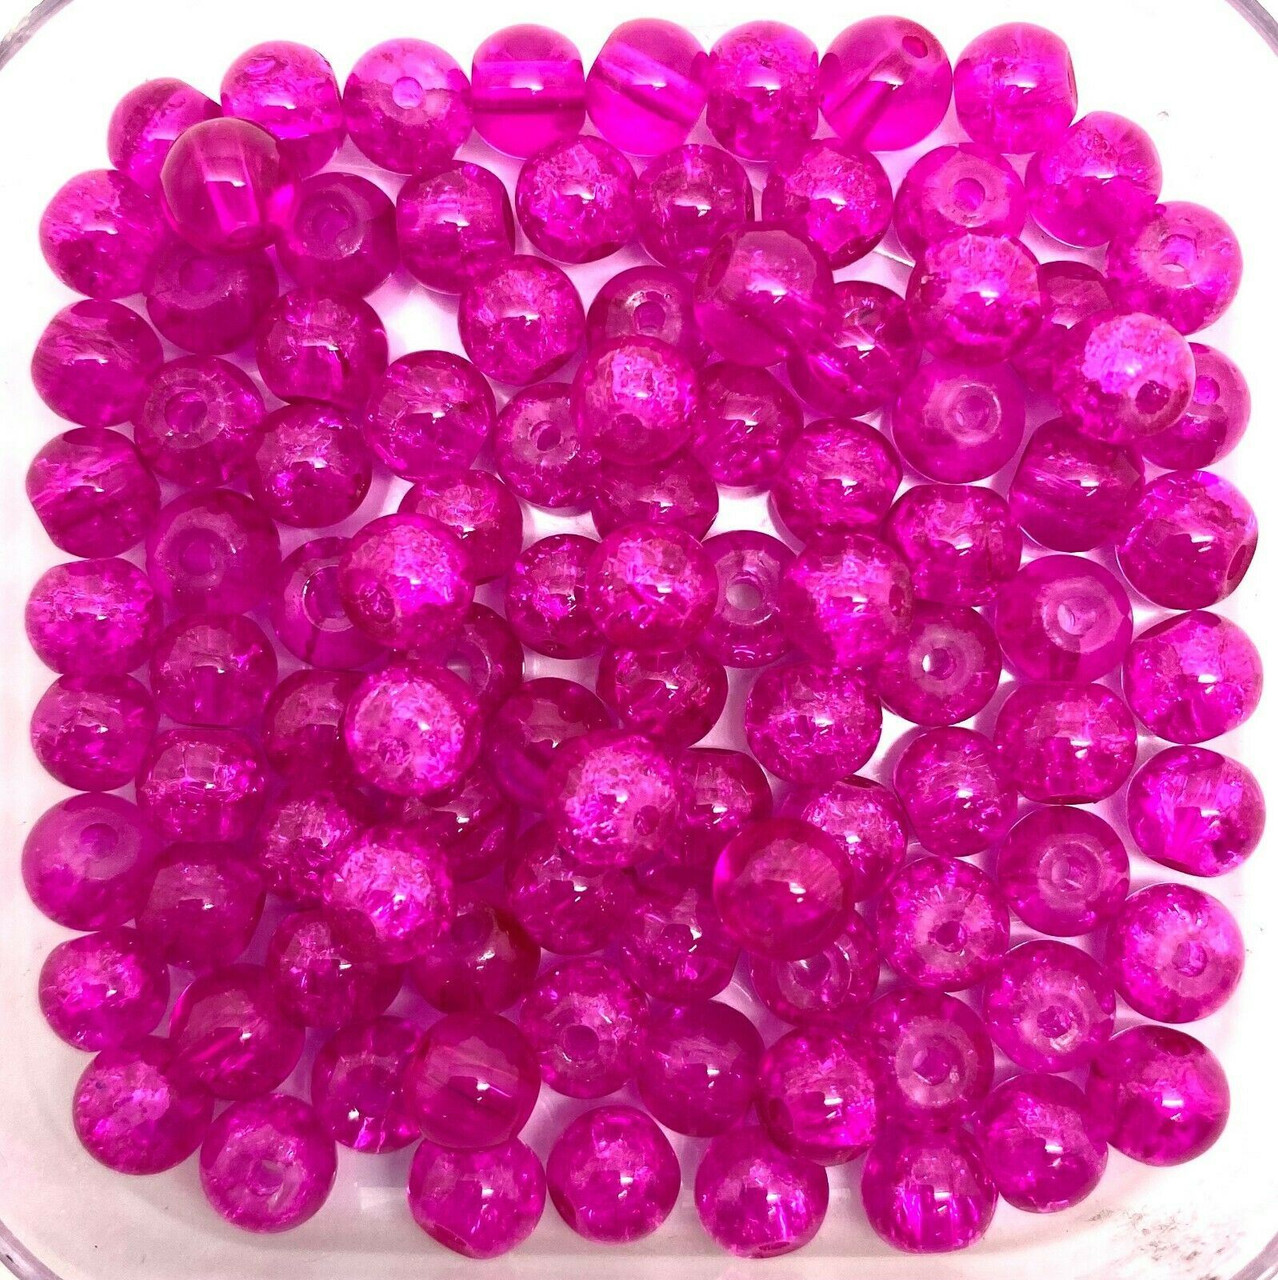 4mm Crackle Glass Beads - Hot Pink, 200 beads